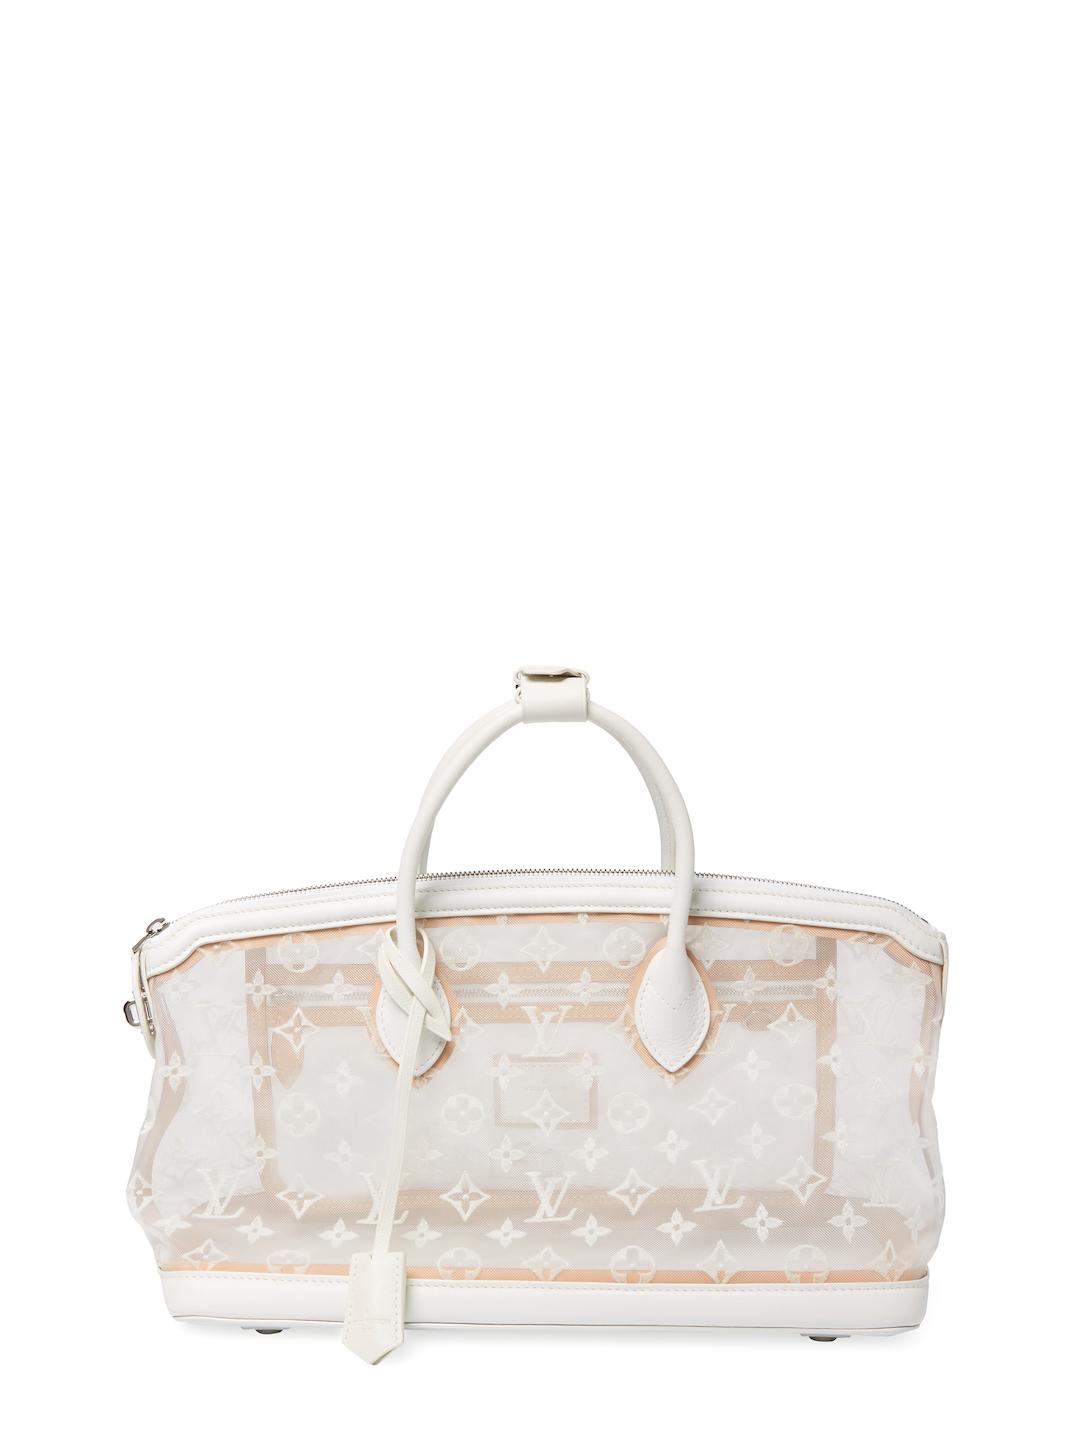 Louis Vuitton Leather Vintage Monogram Transparence Lockit Small in White - Lyst